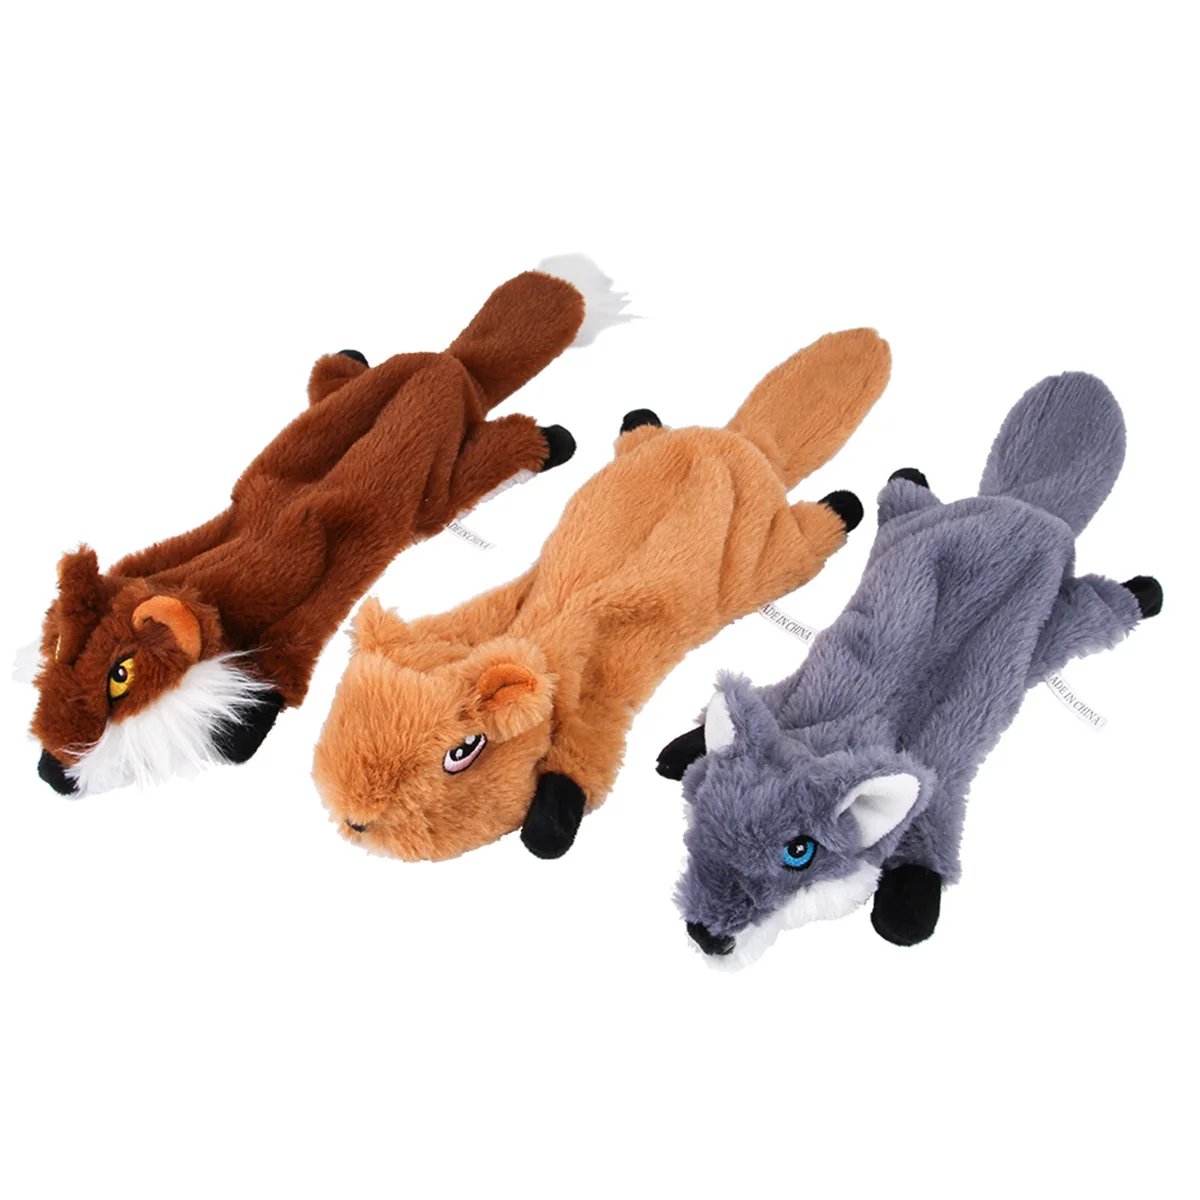 

3Pc Dog Toys No Stuffing Plush Squirrel Wolf Fox Squeaky Chew Toy Set for Small Medium Dogs Teeth Cleaning Puppy Pet Accessories